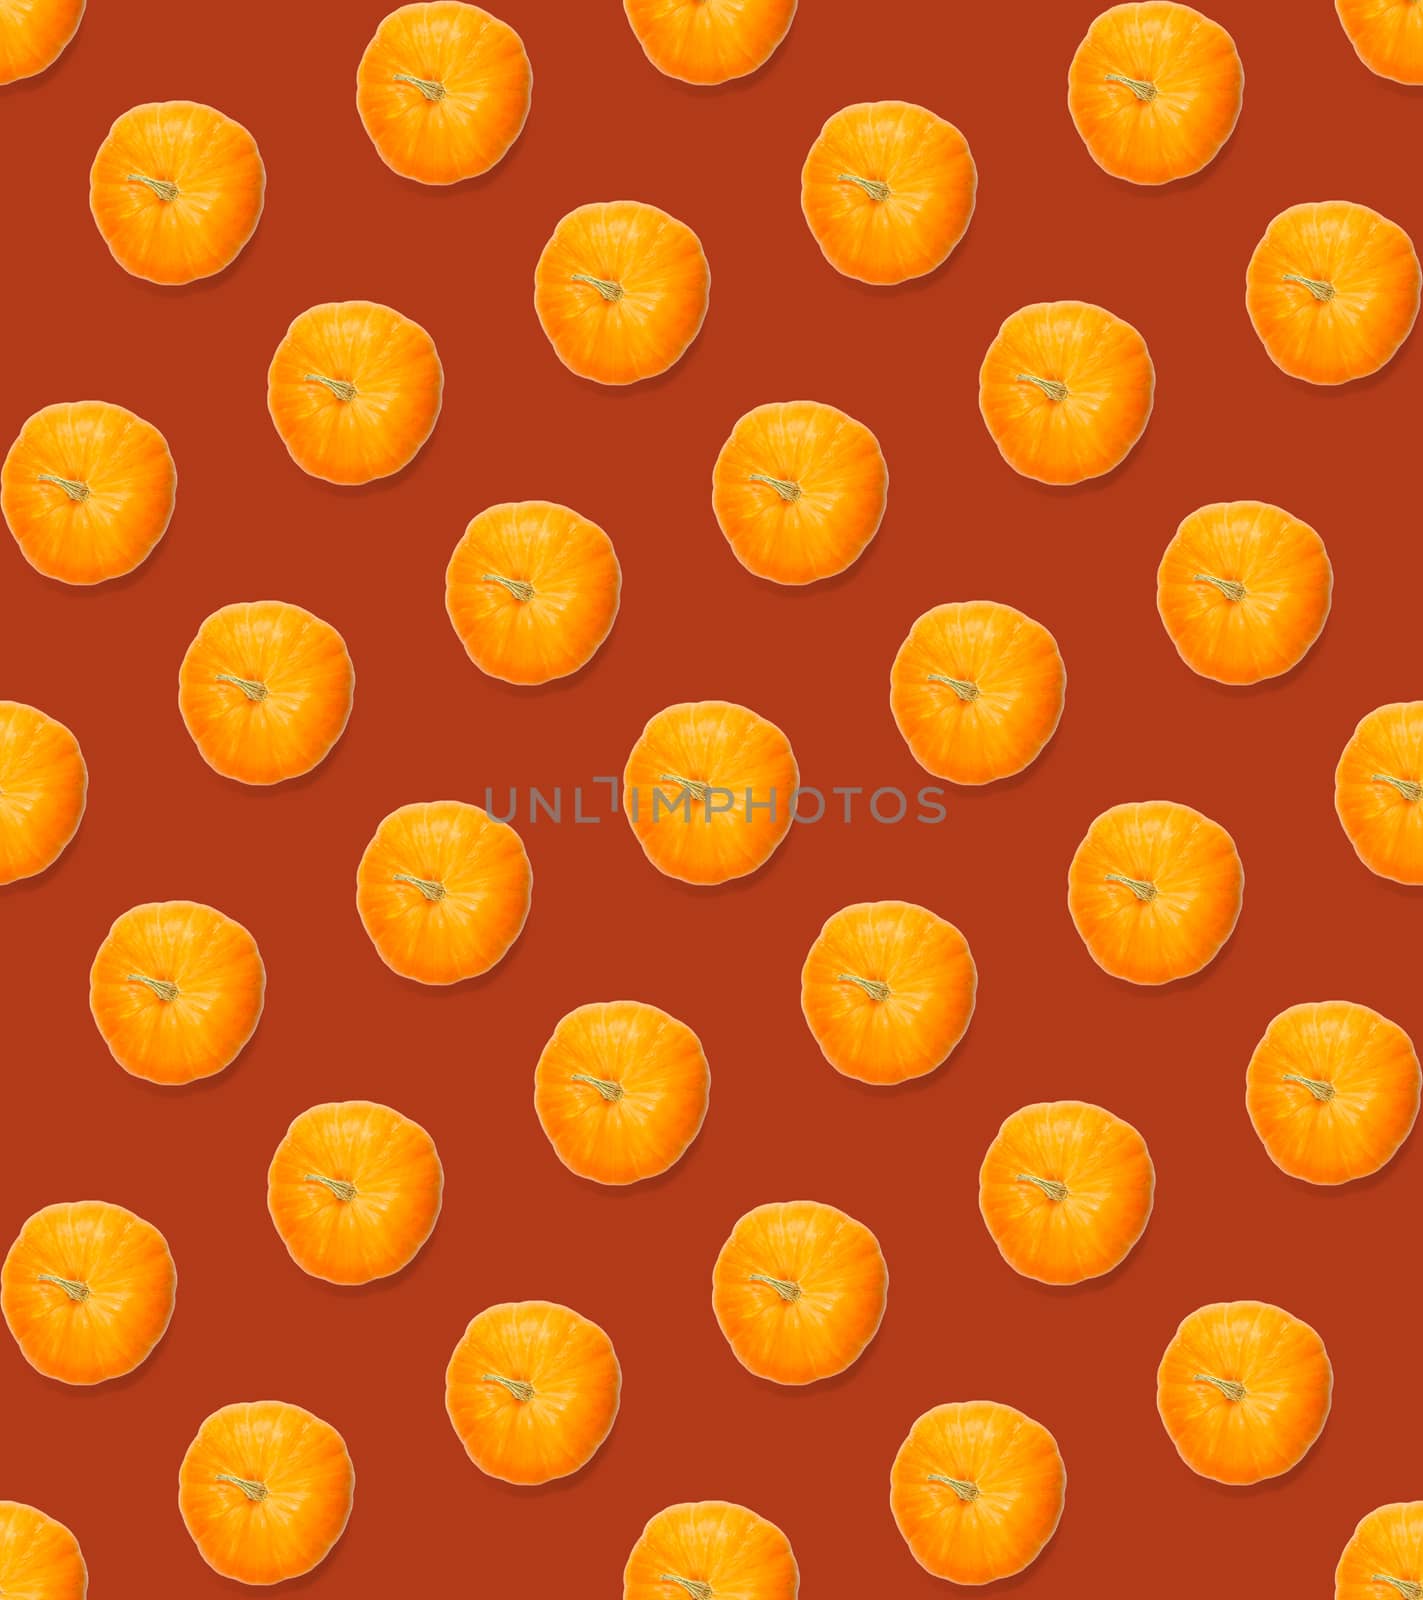 Seamless pattern with pumpkin. Pumpkin quality pattern. Autumn abstract seamless pattern made from Pumpkins on the red background.